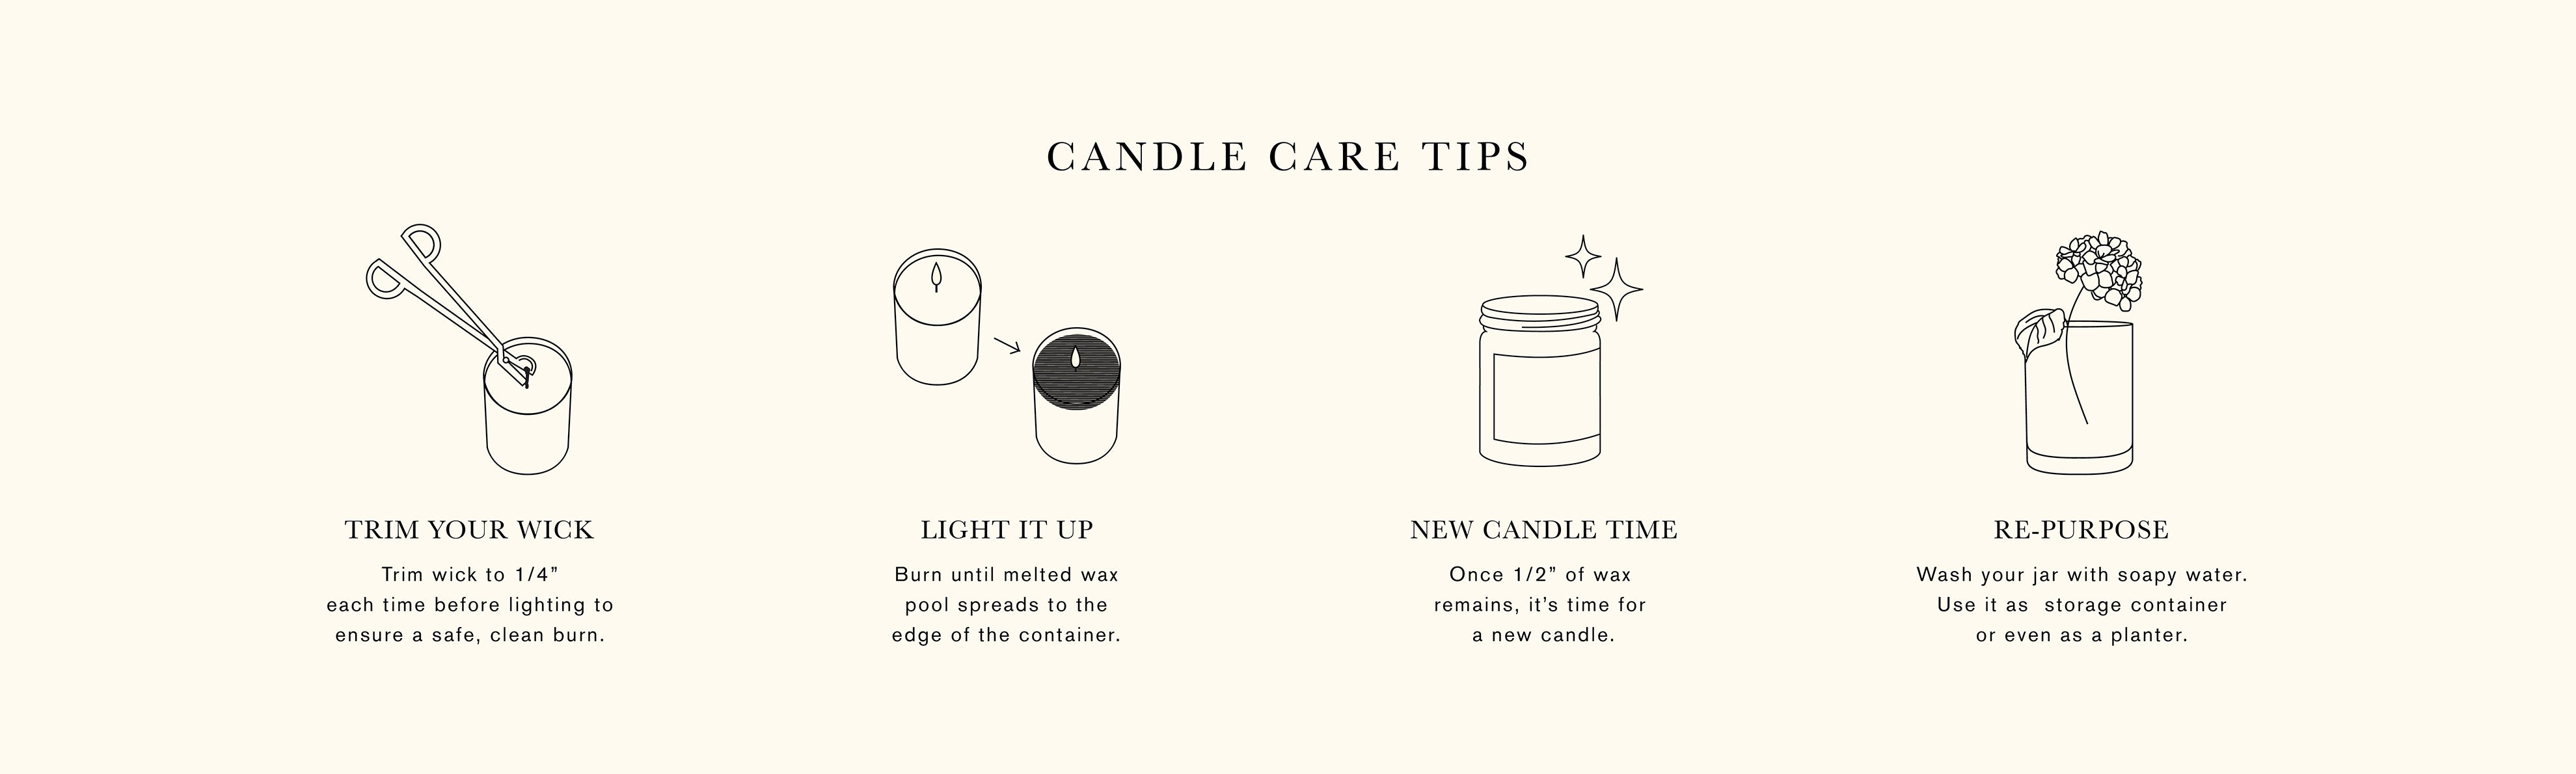 Candle Care Tips Diagram - trim your wick - light it up - new candle time - repurpose